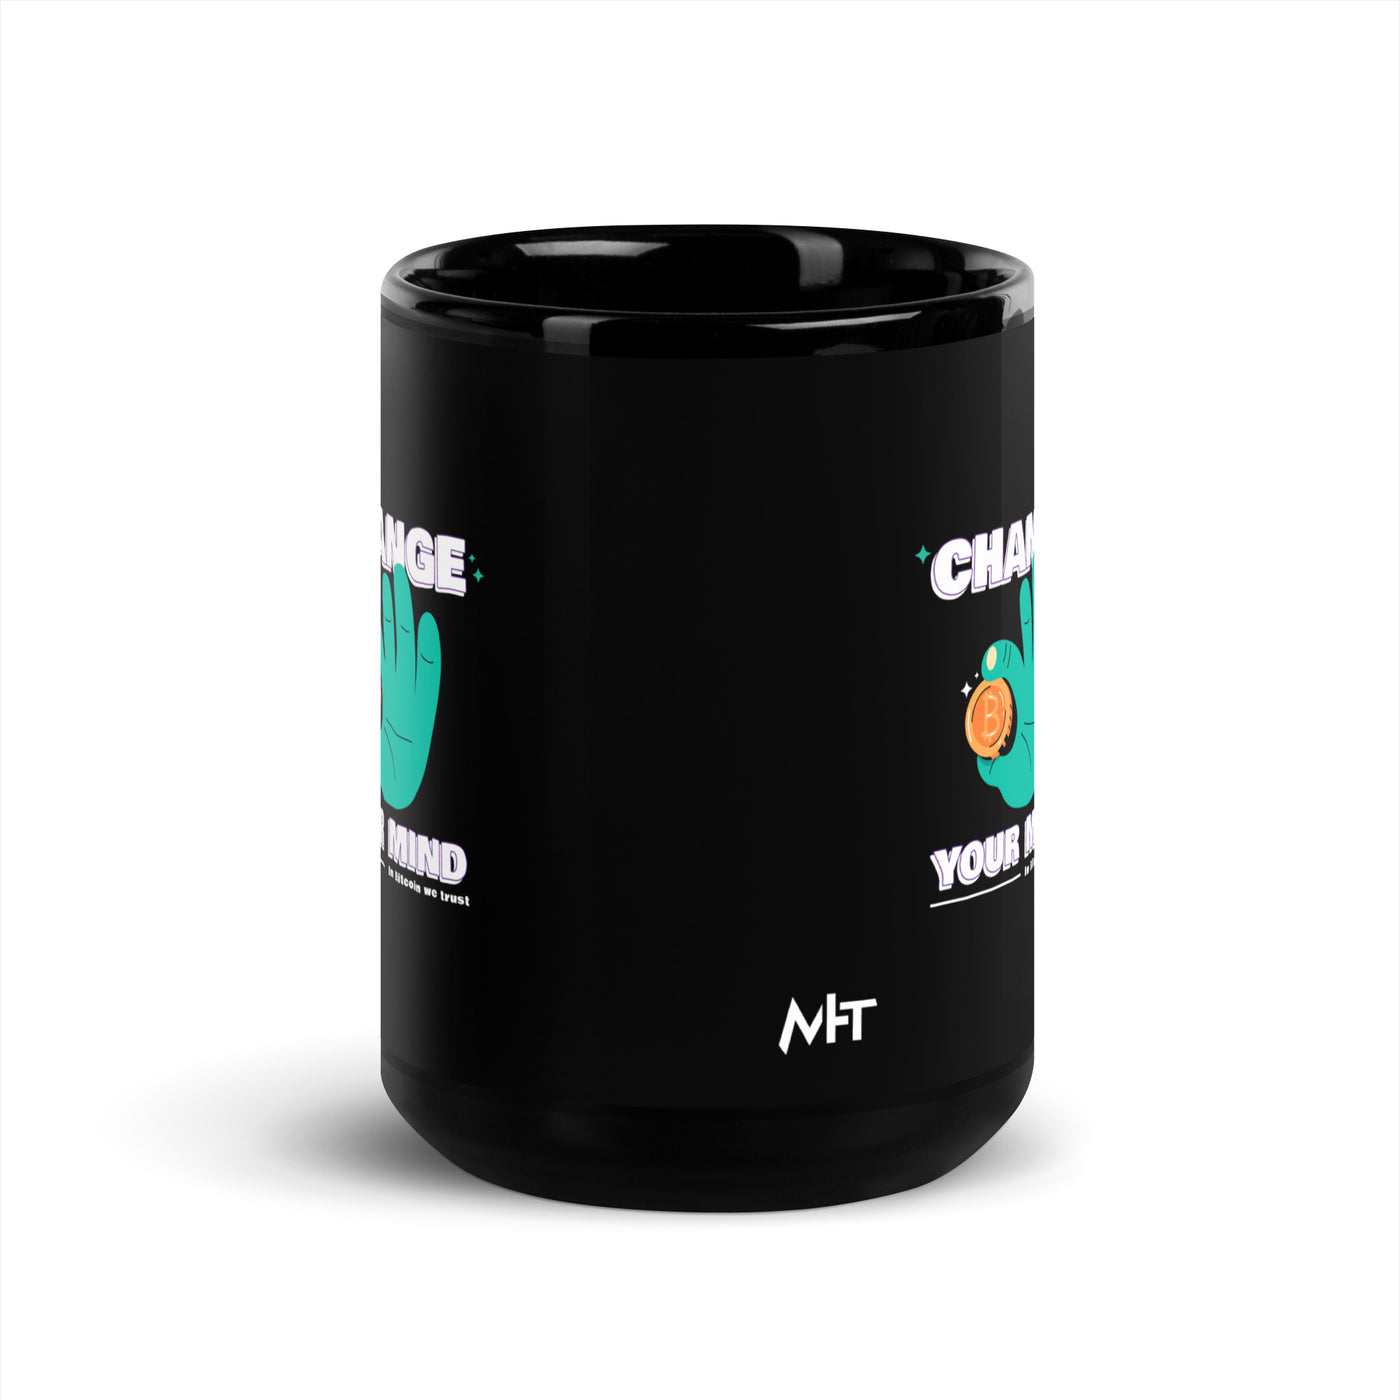 Change your mind in Bitcoin we Trust - Black Glossy Mug